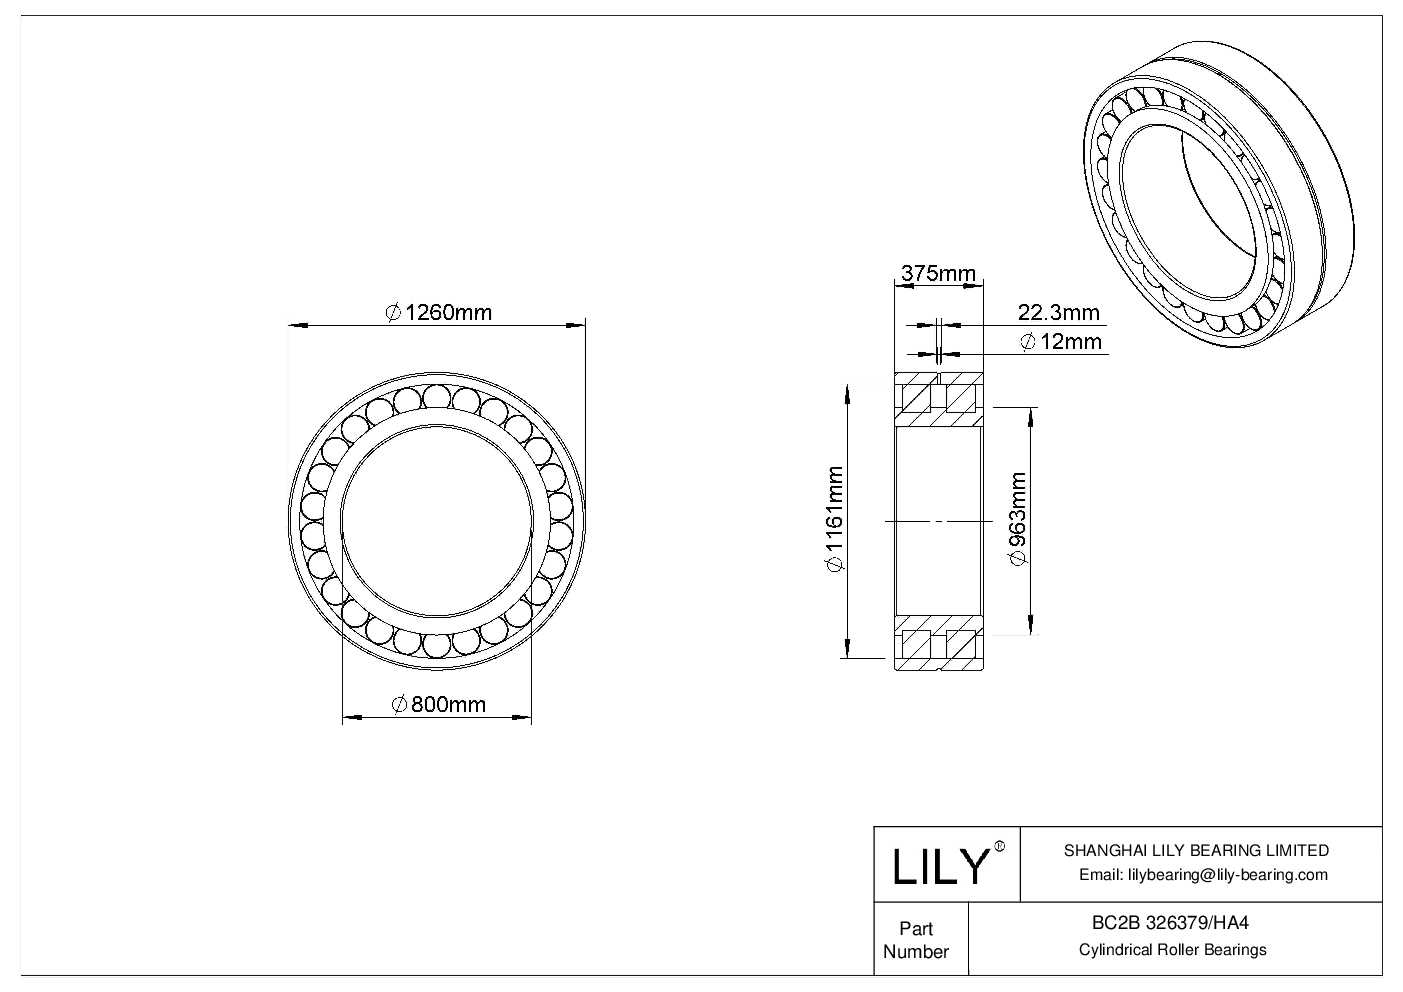 BC2B 326379/HA4 Double Row Cylindrical Roller Bearings cad drawing